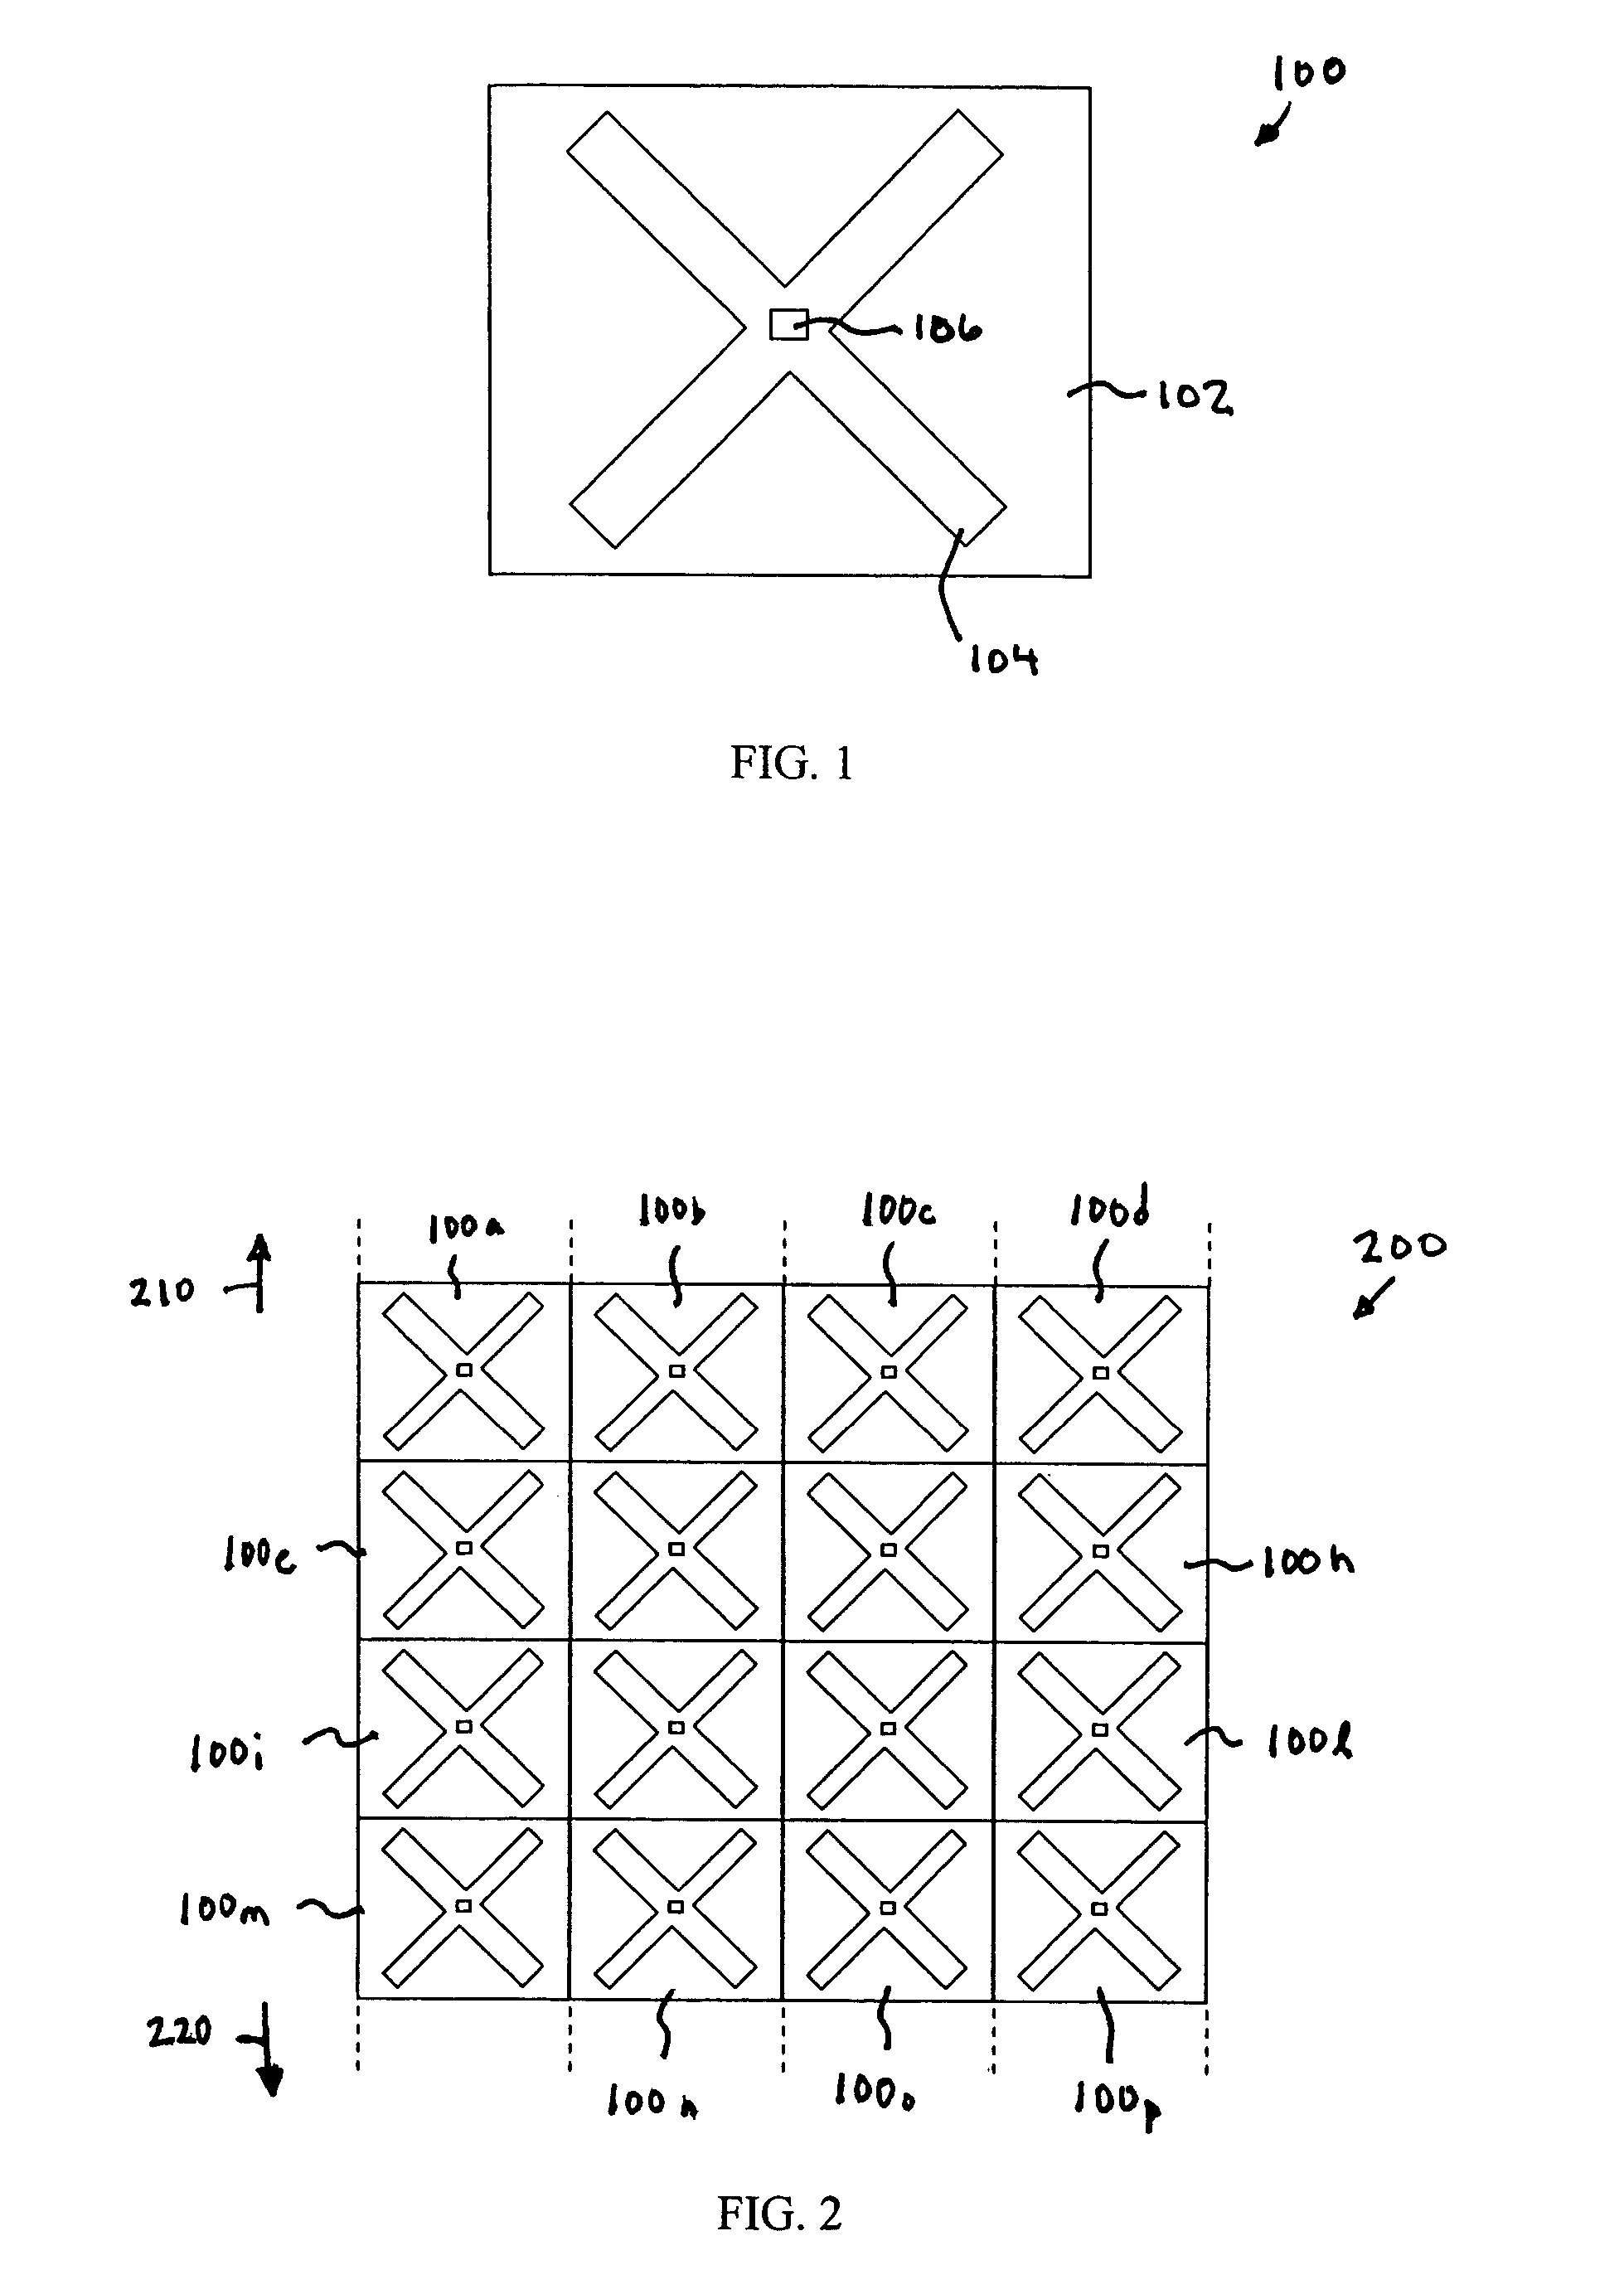 Systems and methods for testing radio frequency identification tags